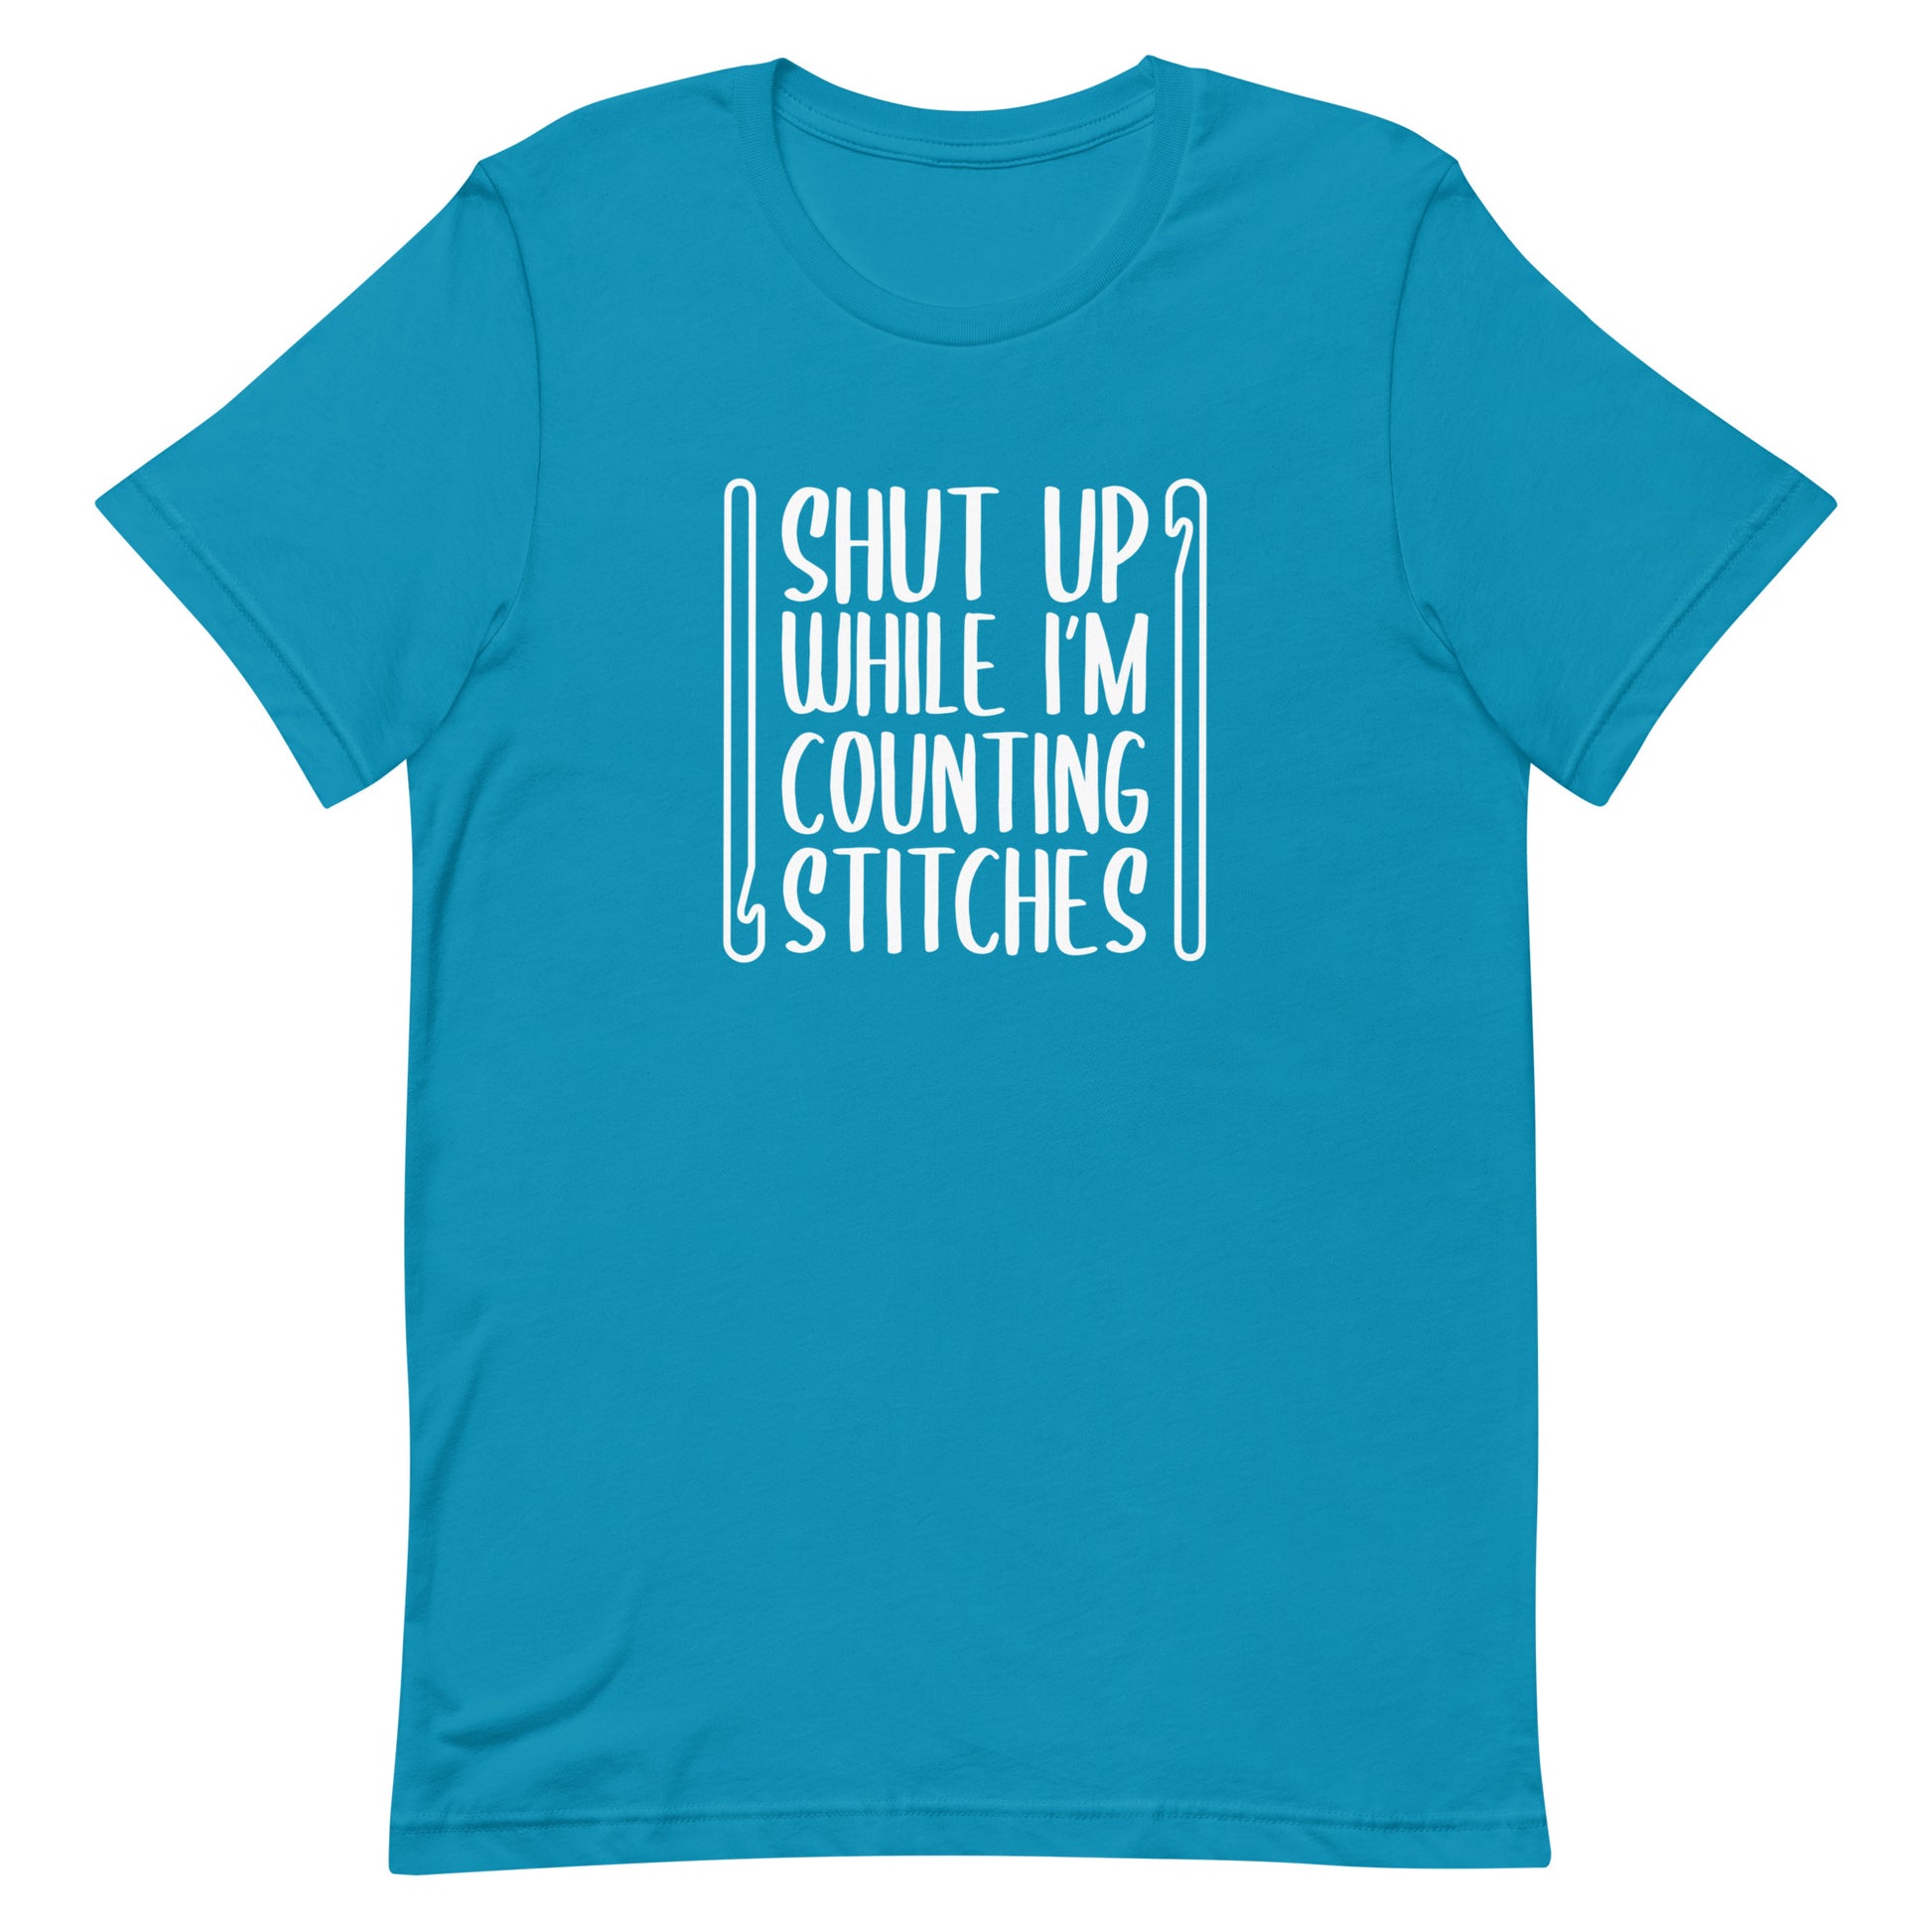 A blue crewneck t-shirt featuring white text that reads "Shut up while I'm counting stitches." The text is framed by a crochet hook to the left and right.